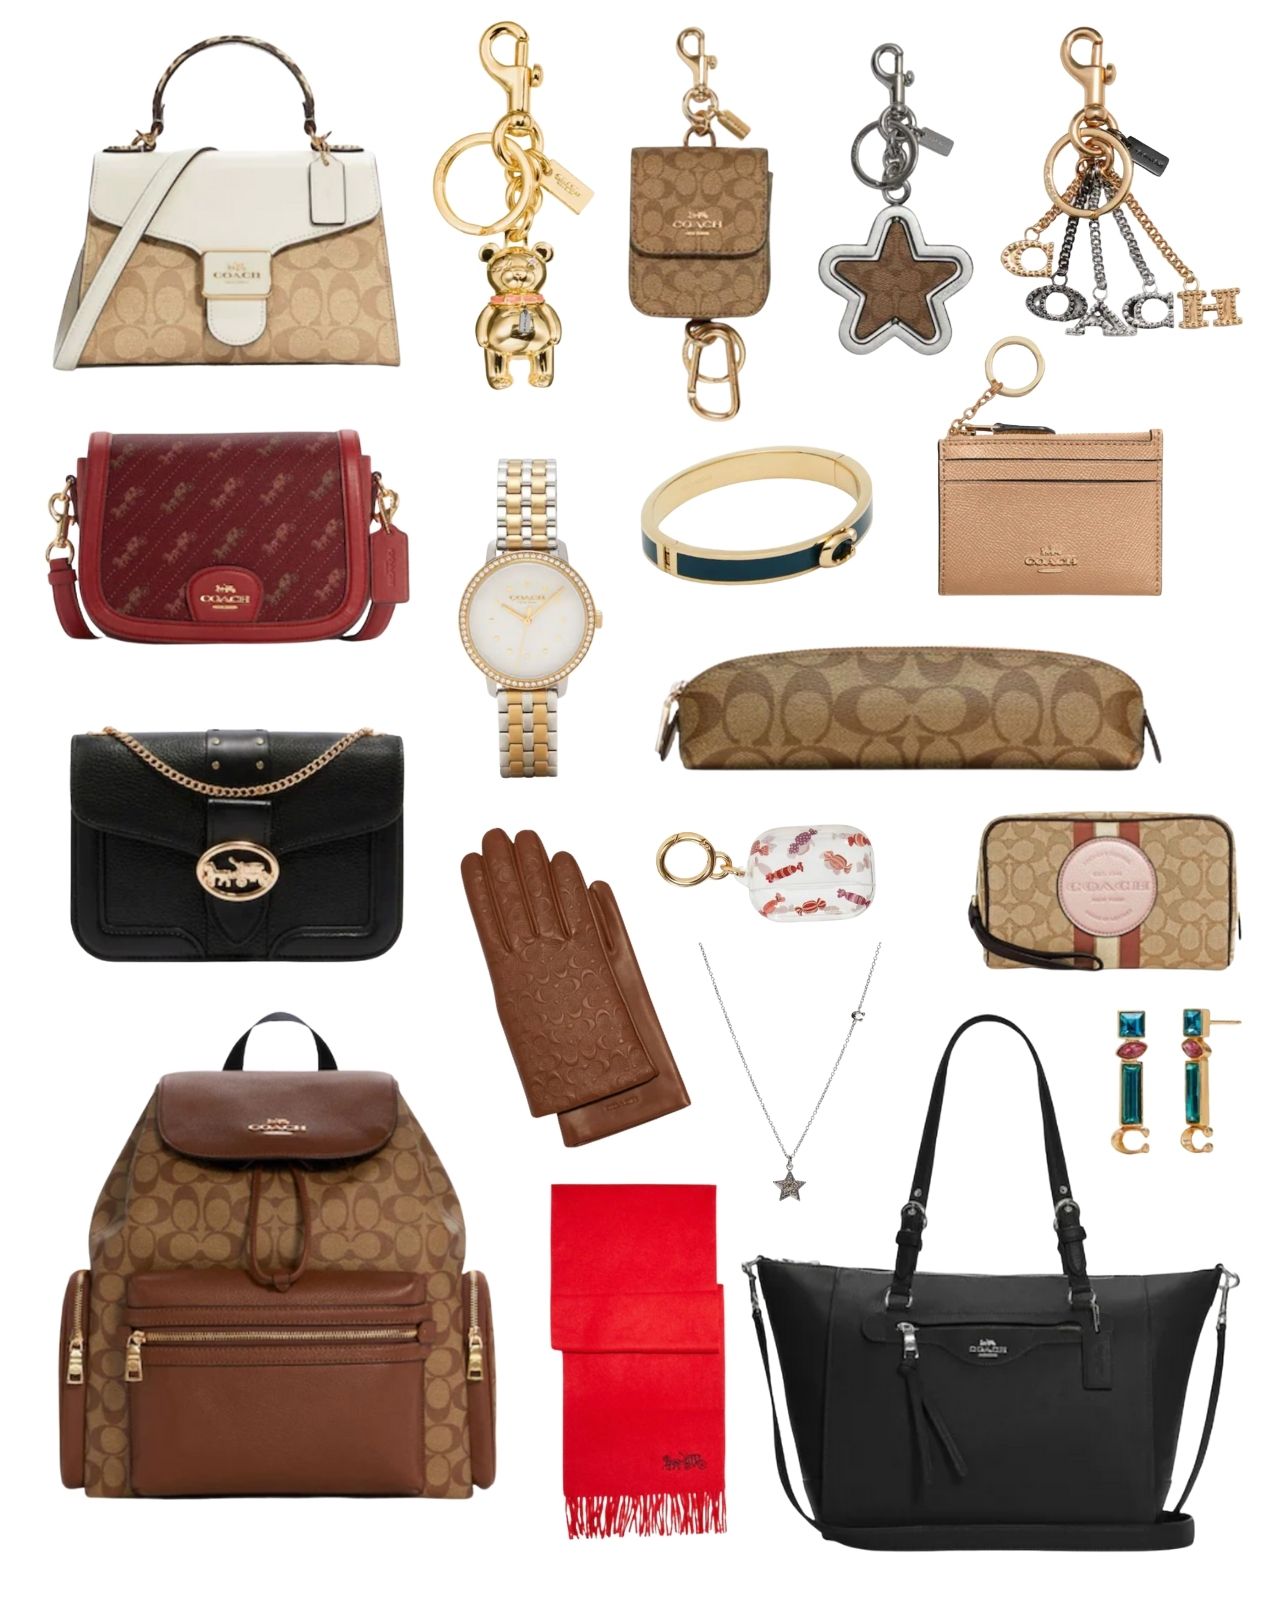 Coach Outlet Shine Collection: Buy discounted bags, shoes, accessories 